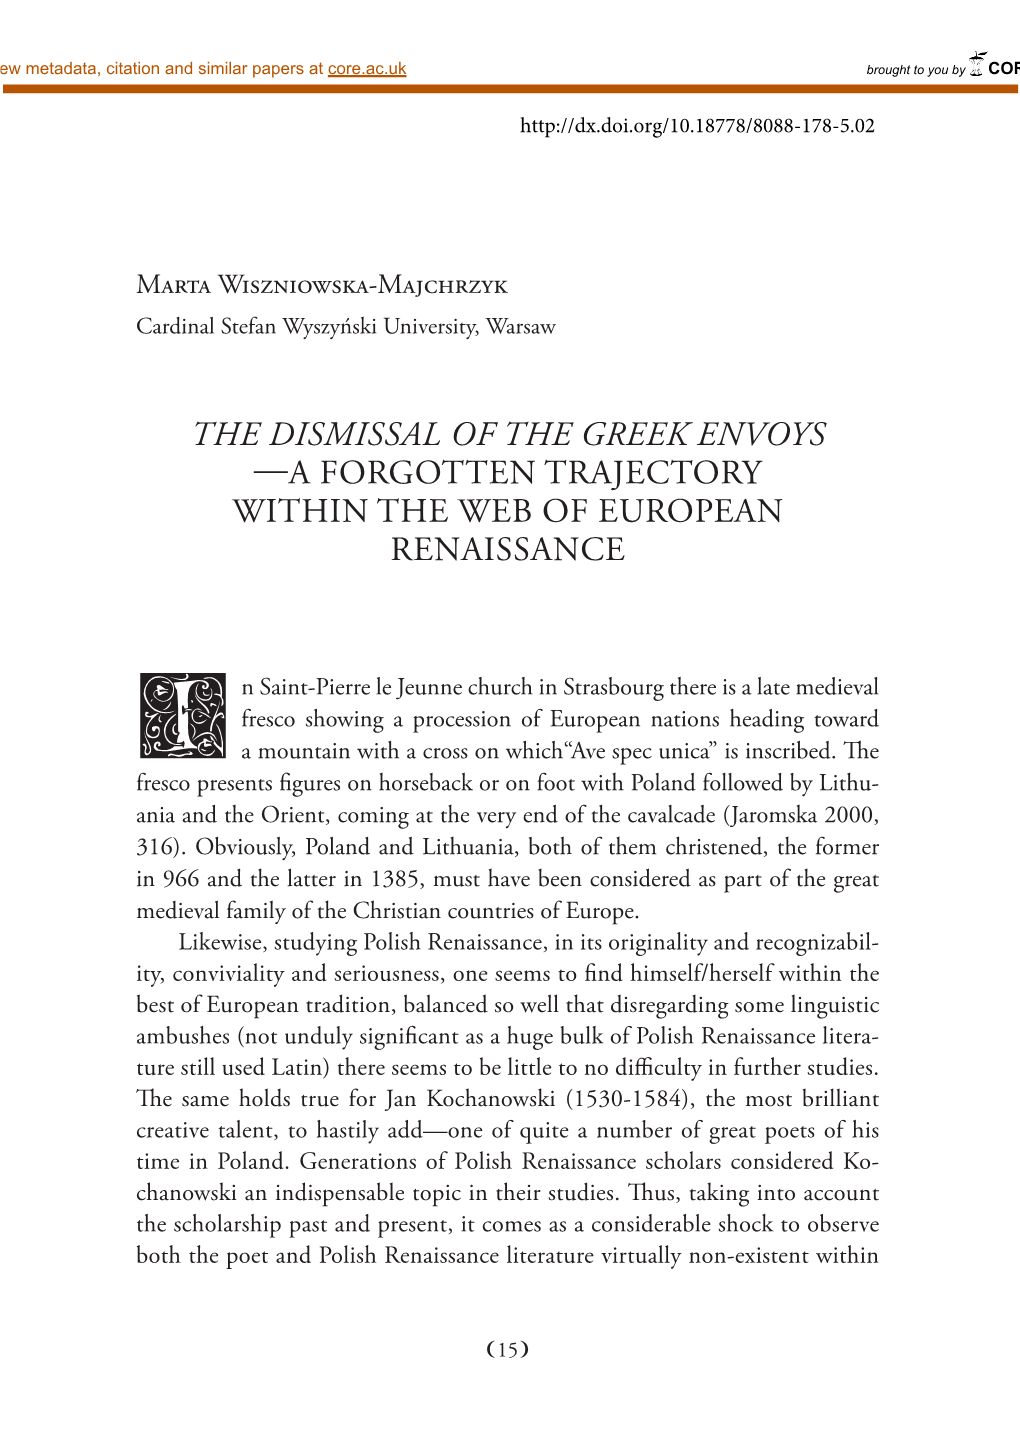 The Dismissal of the Greek Envoys —A Forgotten Trajectory Within the Web of European Renaissance